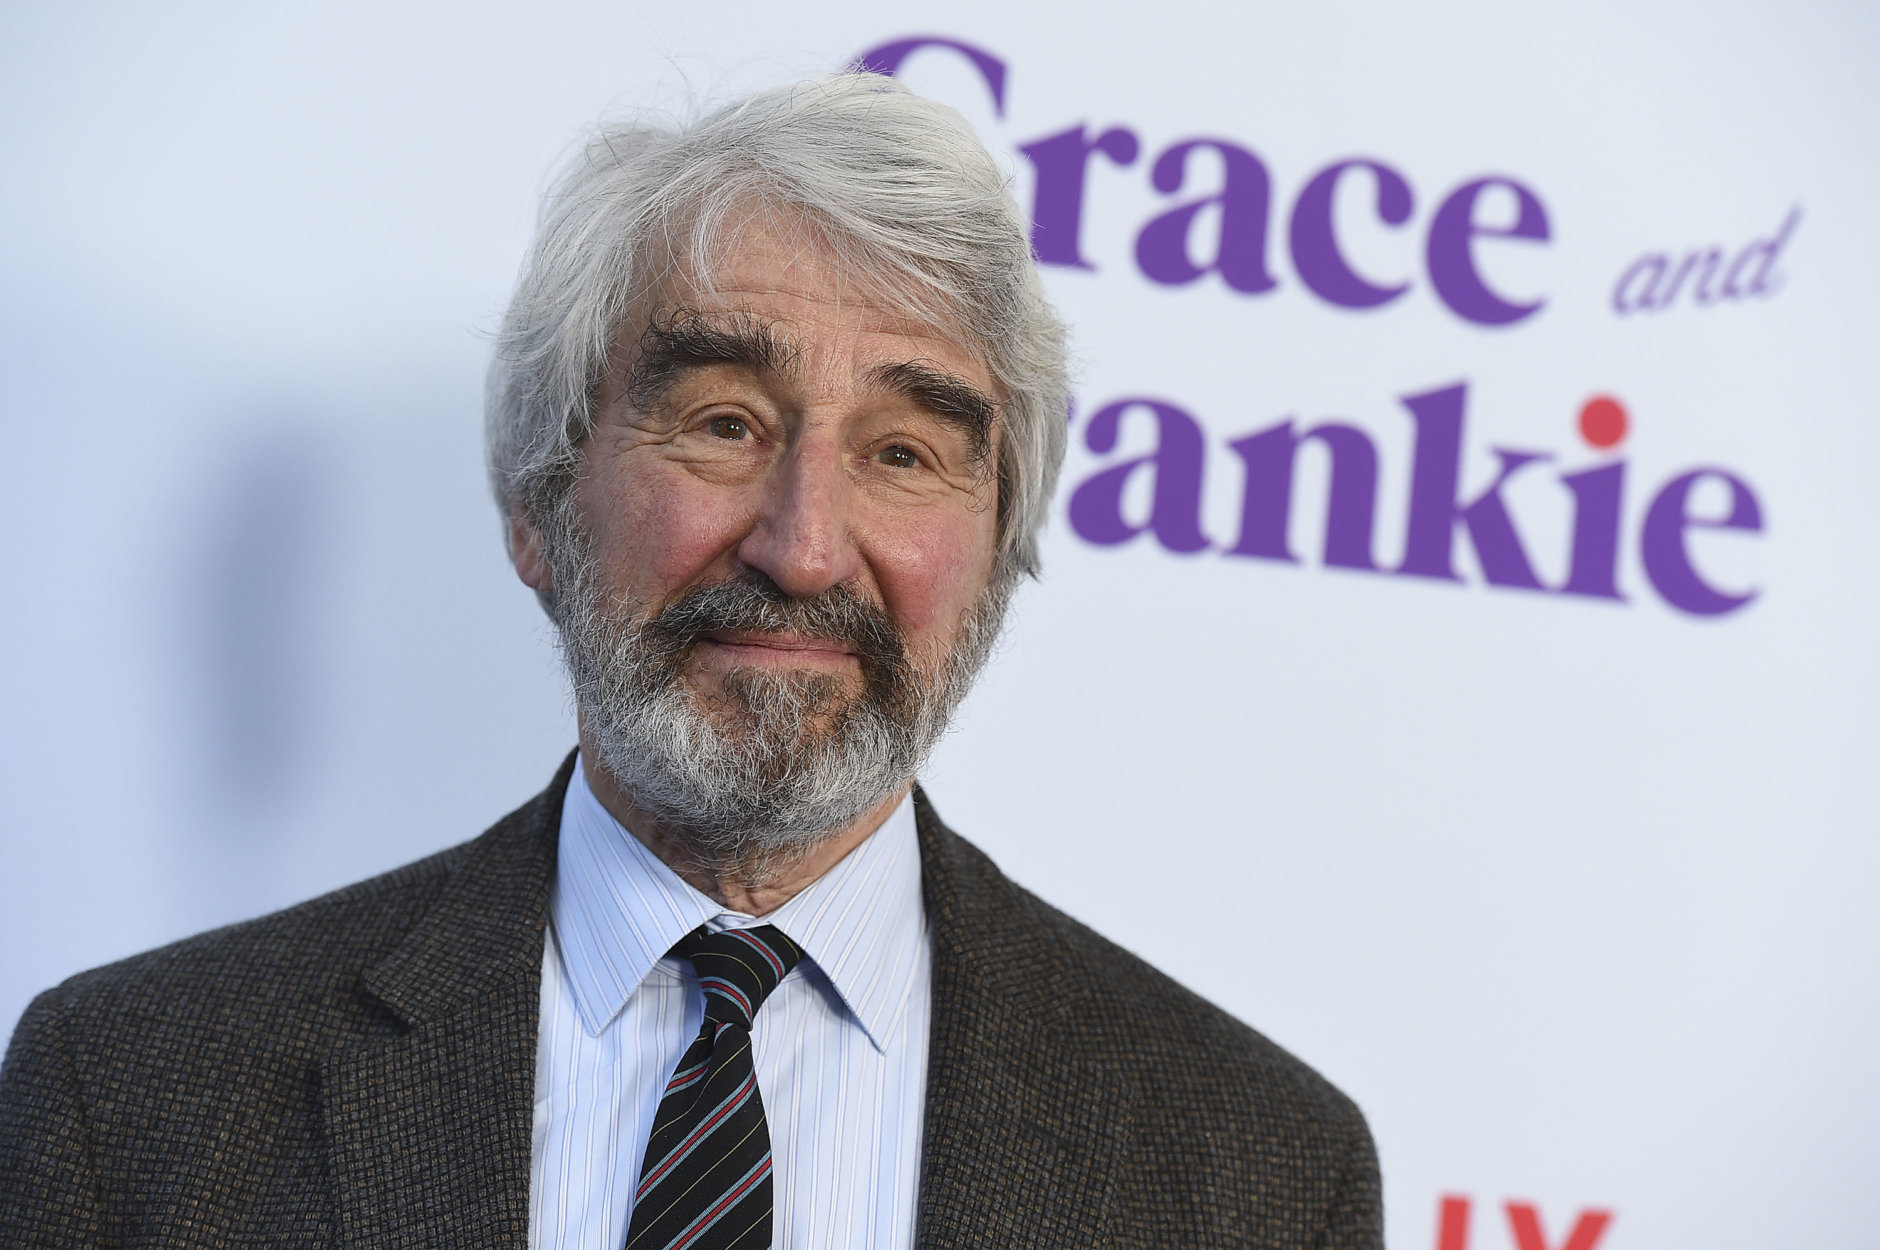 Sam Waterston arrives at the Los Angeles premiere of "Grace and Frankie" Season Three on Wednesday, Mar. 22 in Los Angeles. (Photo by Jordan Strauss/Invision/AP)